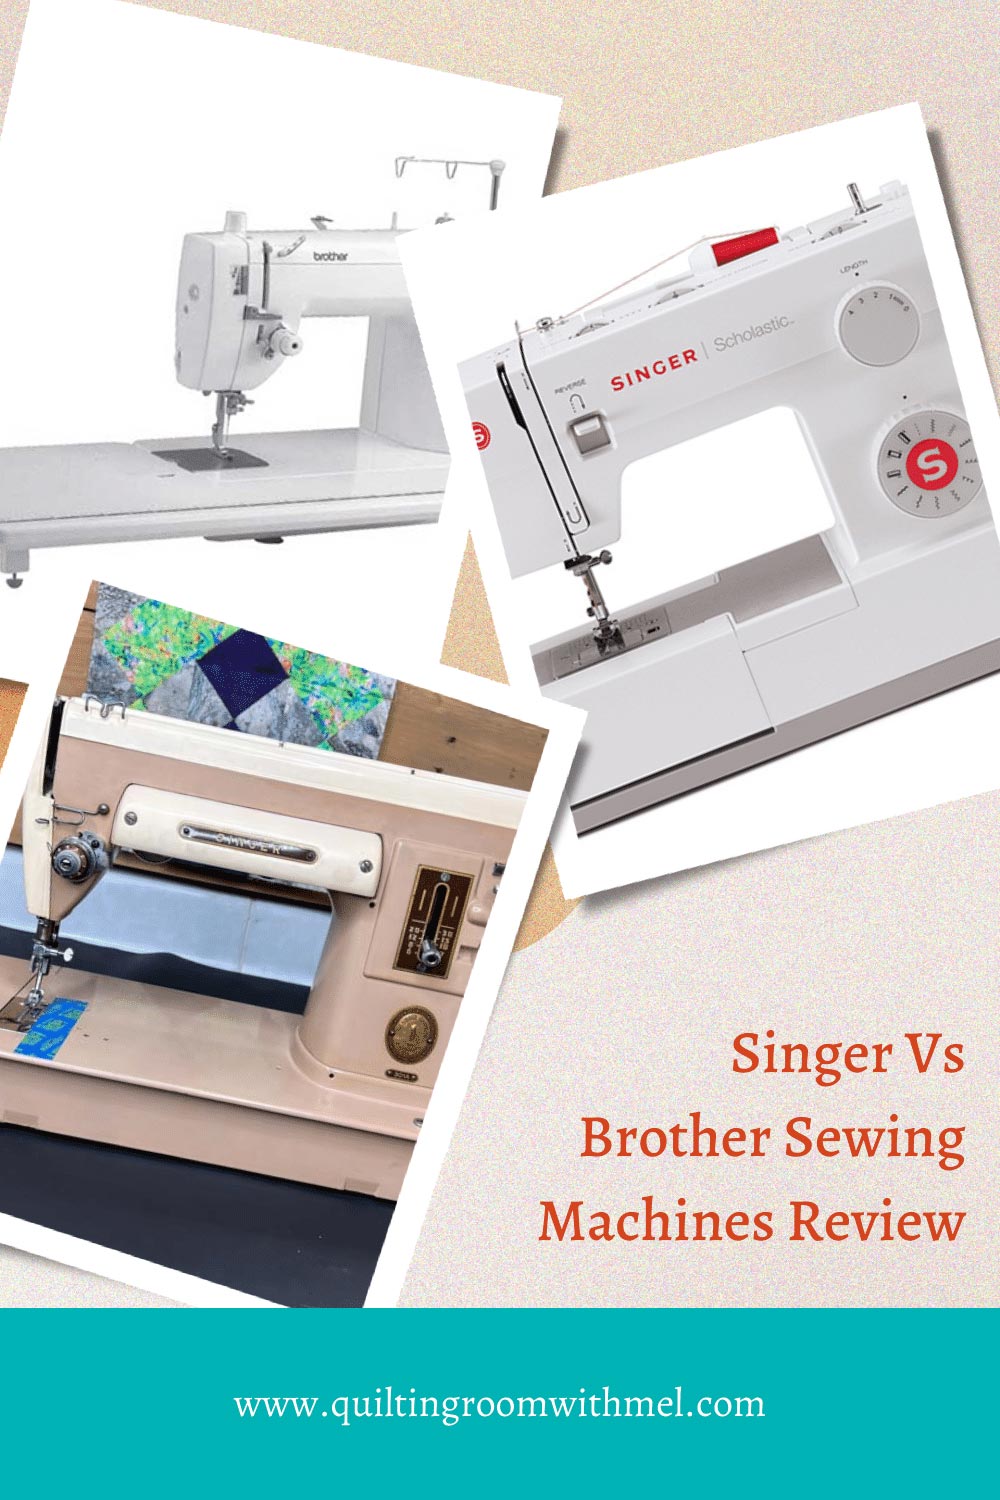 Reviews of the Singer Sewing Machines and Brother Sewing Machines, which one I would buy, and more